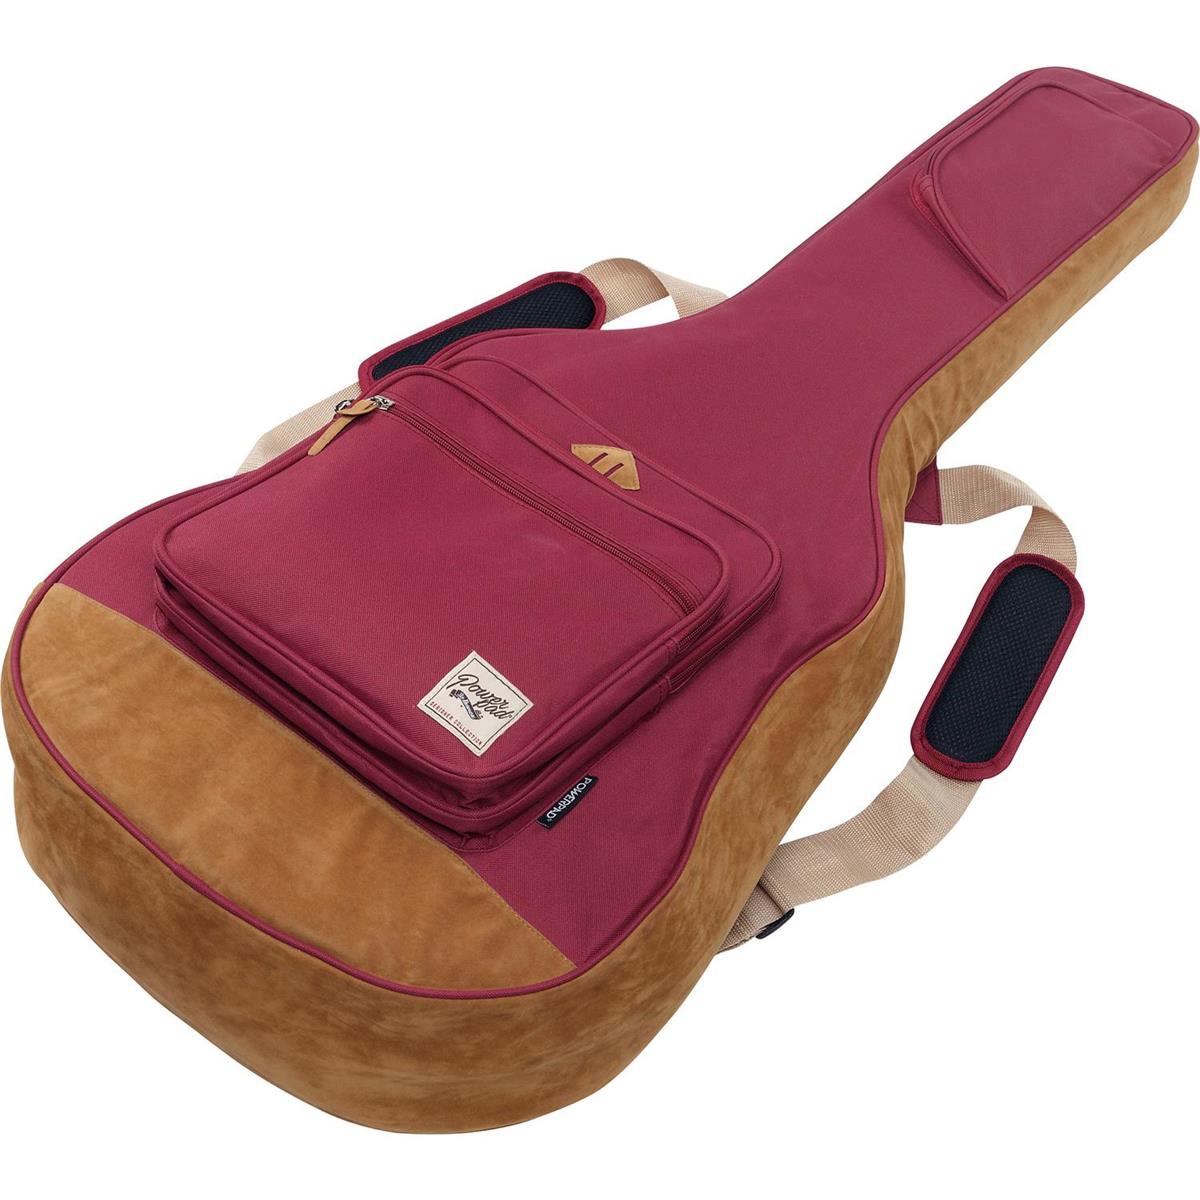 Ibanez IAB541 POWERPAD Designer Collection Gig Bag for Acoustic Guitar, Wine Red -  IAB541WR